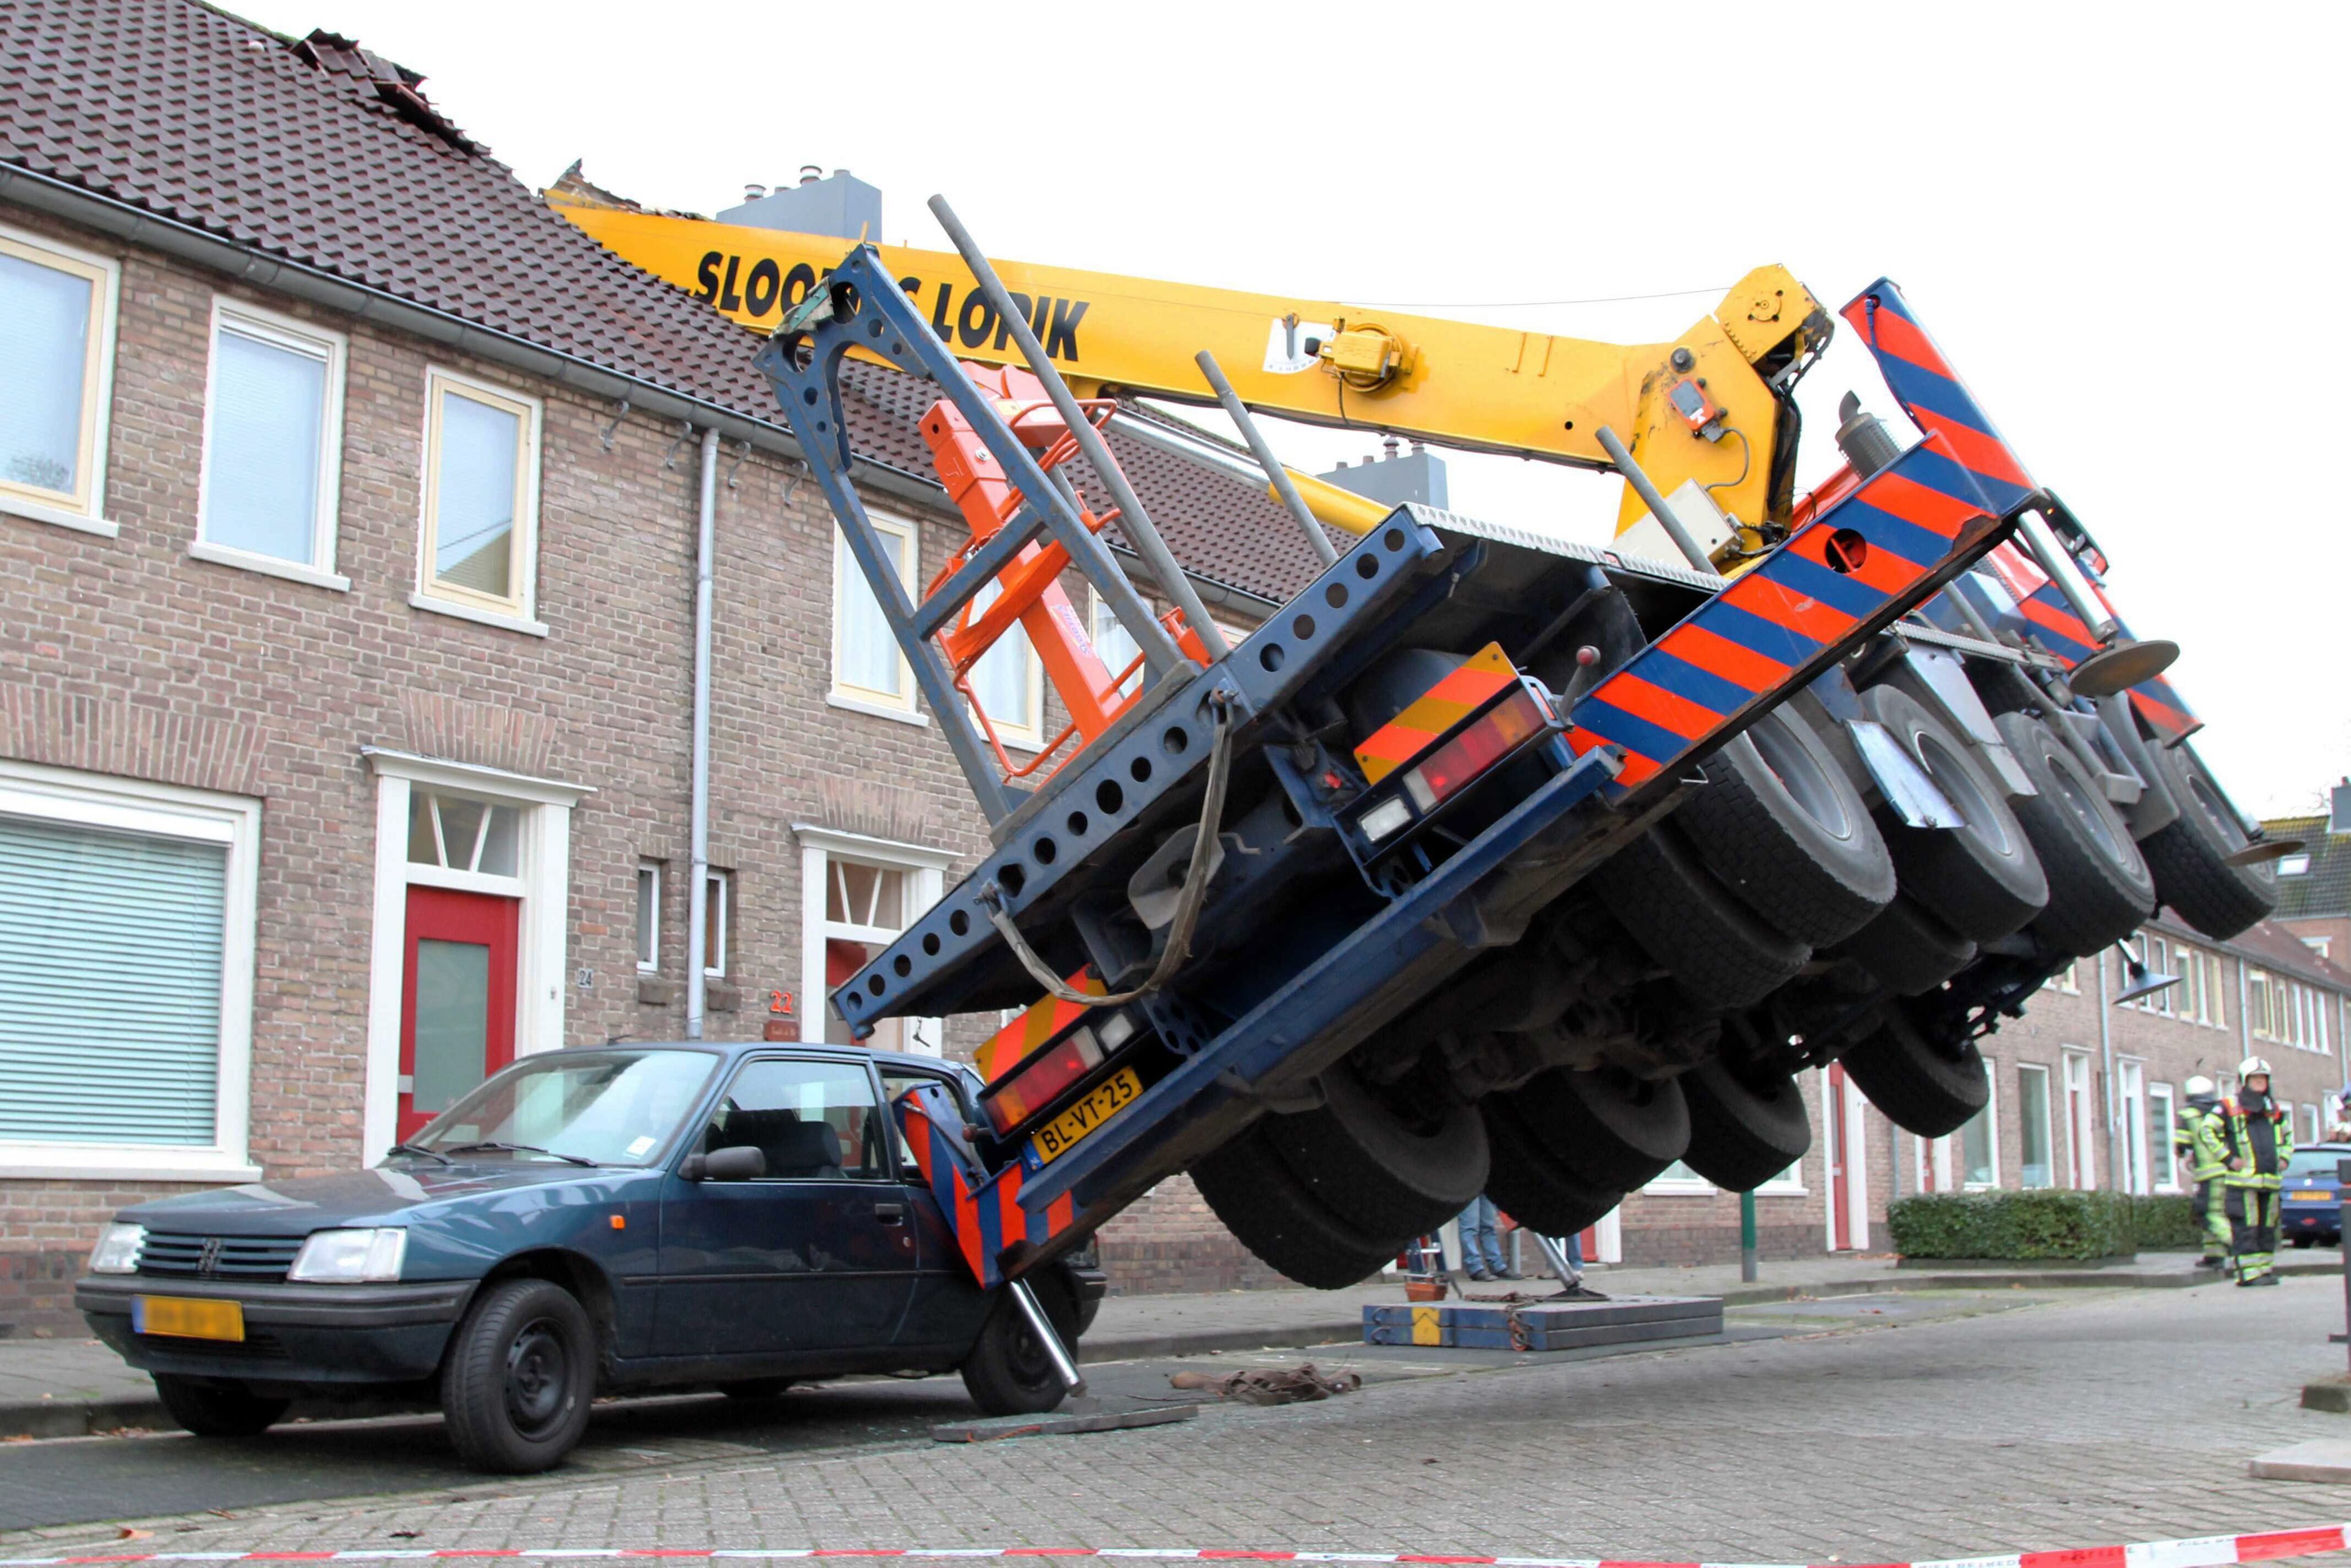 A crane fell on to the roof of a house in IJsselstein, Netherlands,  on Dec. 13, 2014. The incident ocurred when a man tried to surprise his girlfriend by proposing from the top of the crane, which then toppled on to the house, though no injuries were reported. (Michiel Van Beers—EPA)